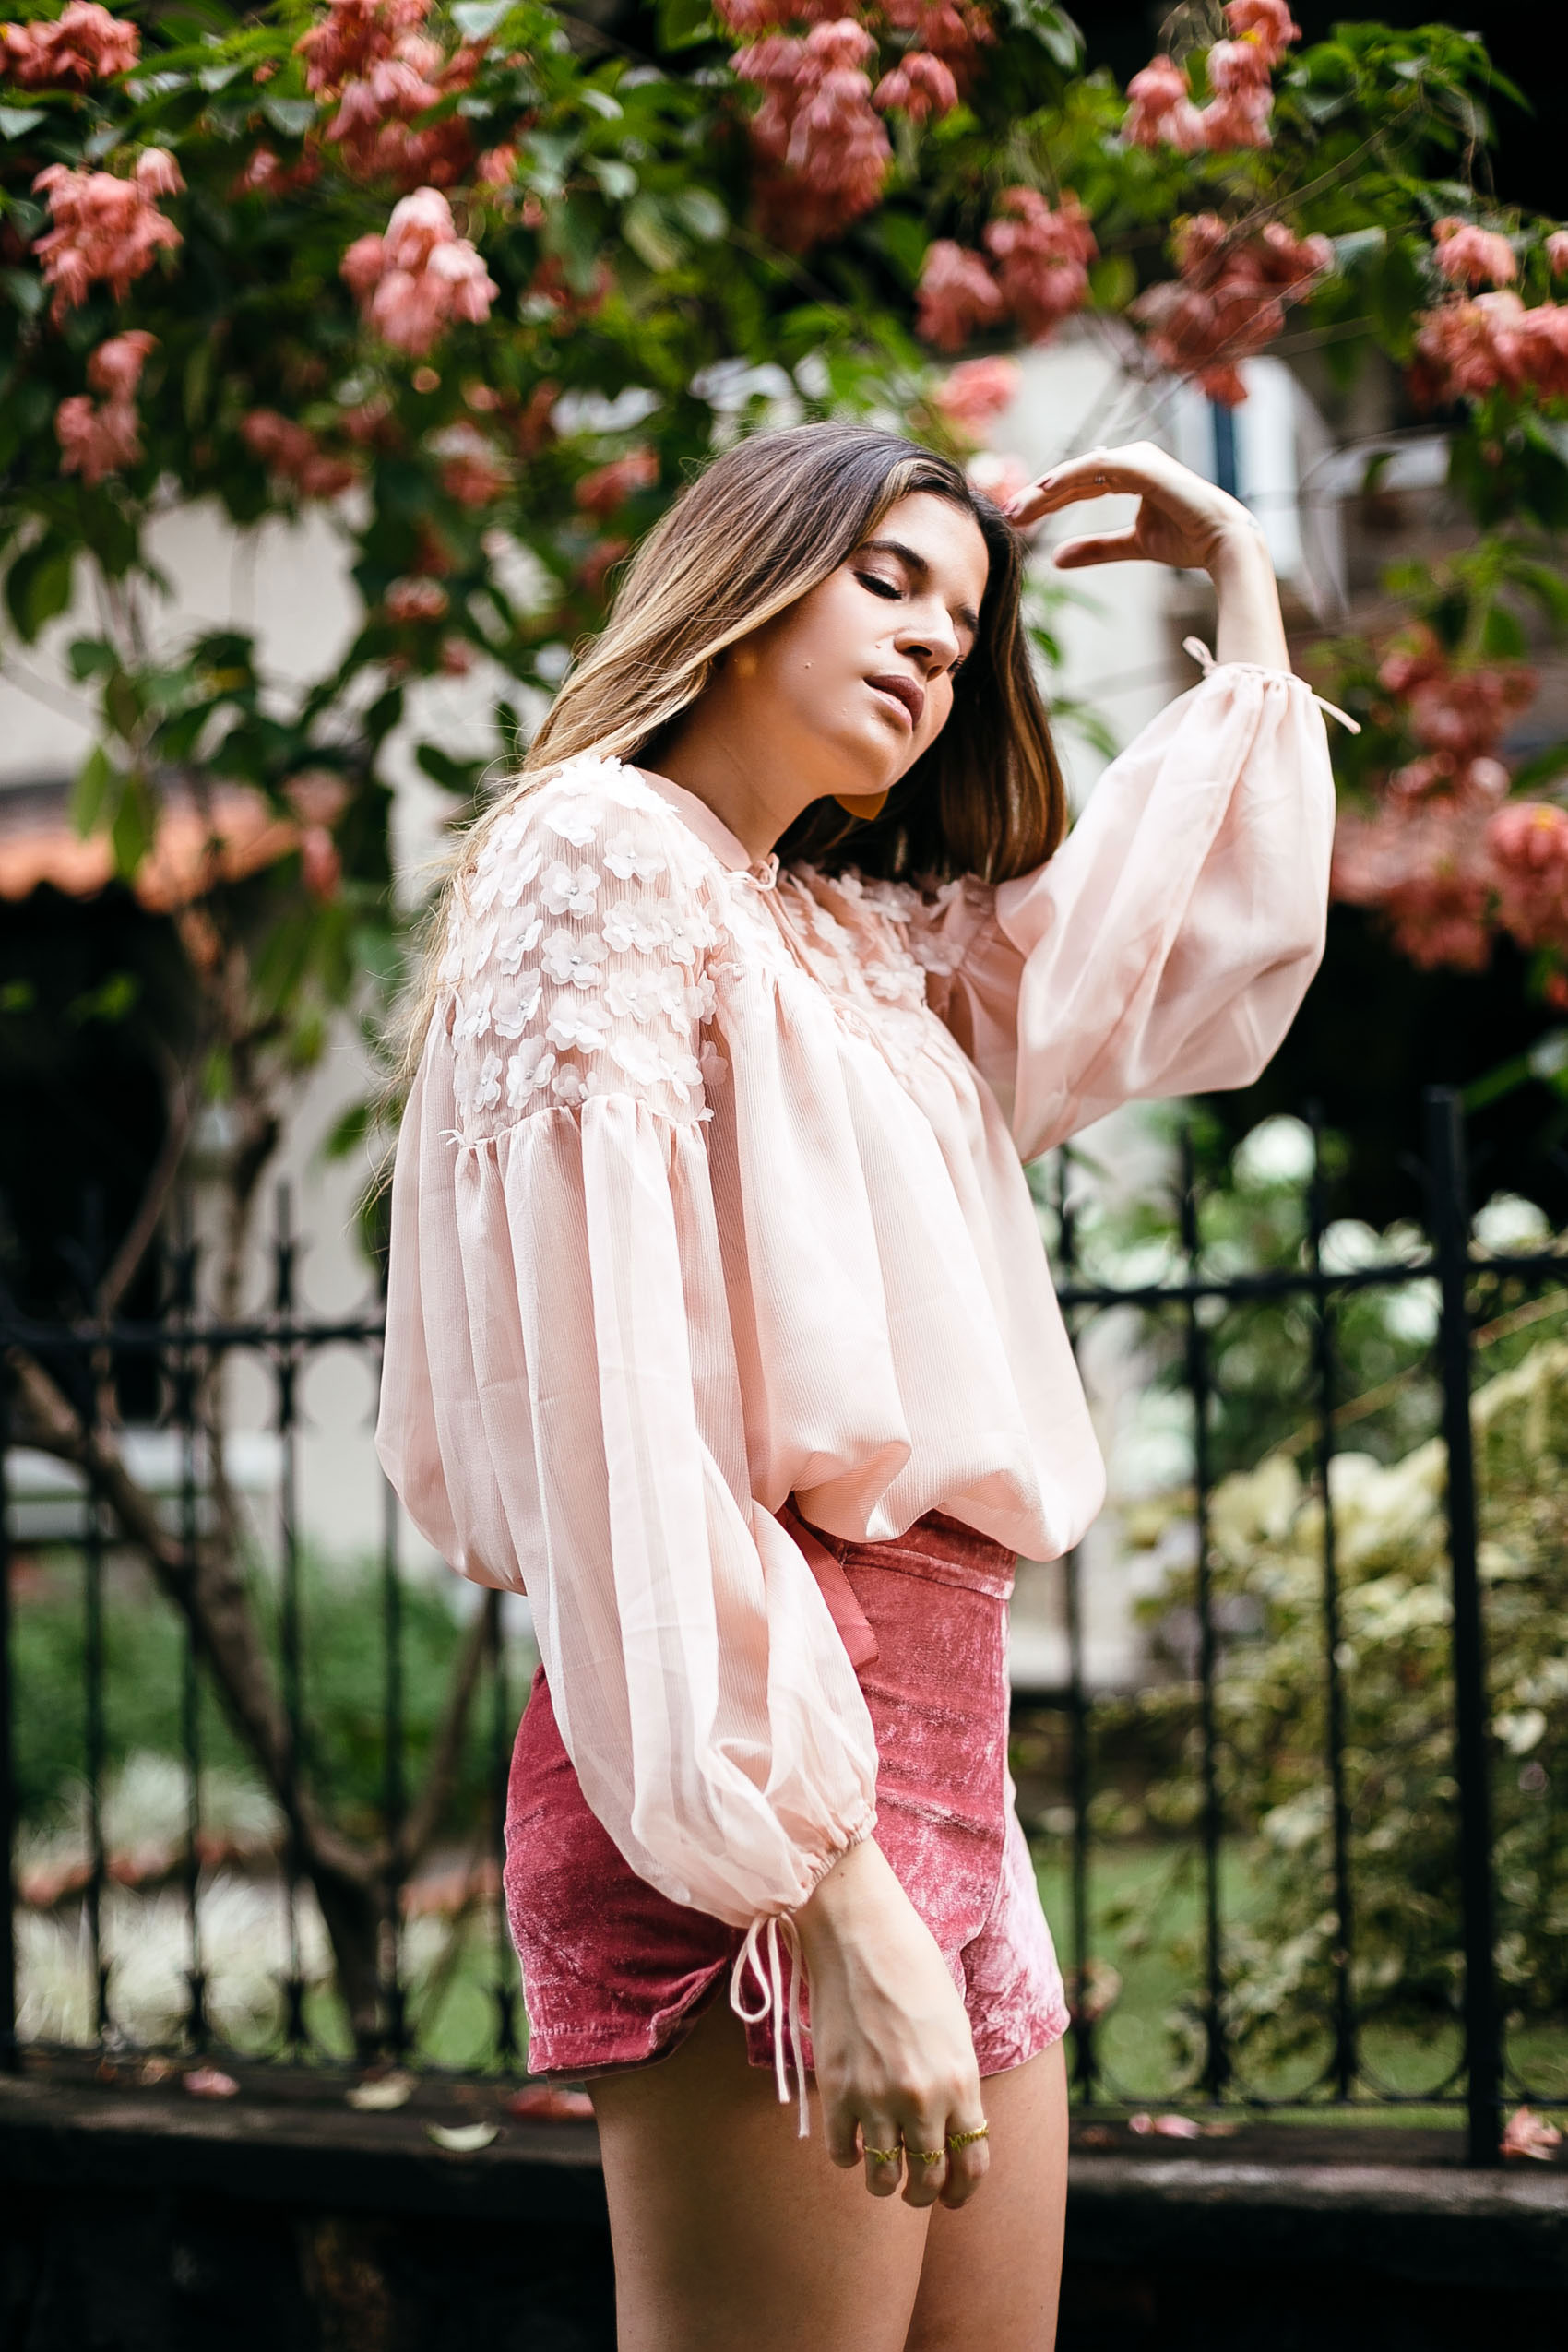 Maristella wears a romantic pink blouse with rose velvet shorts